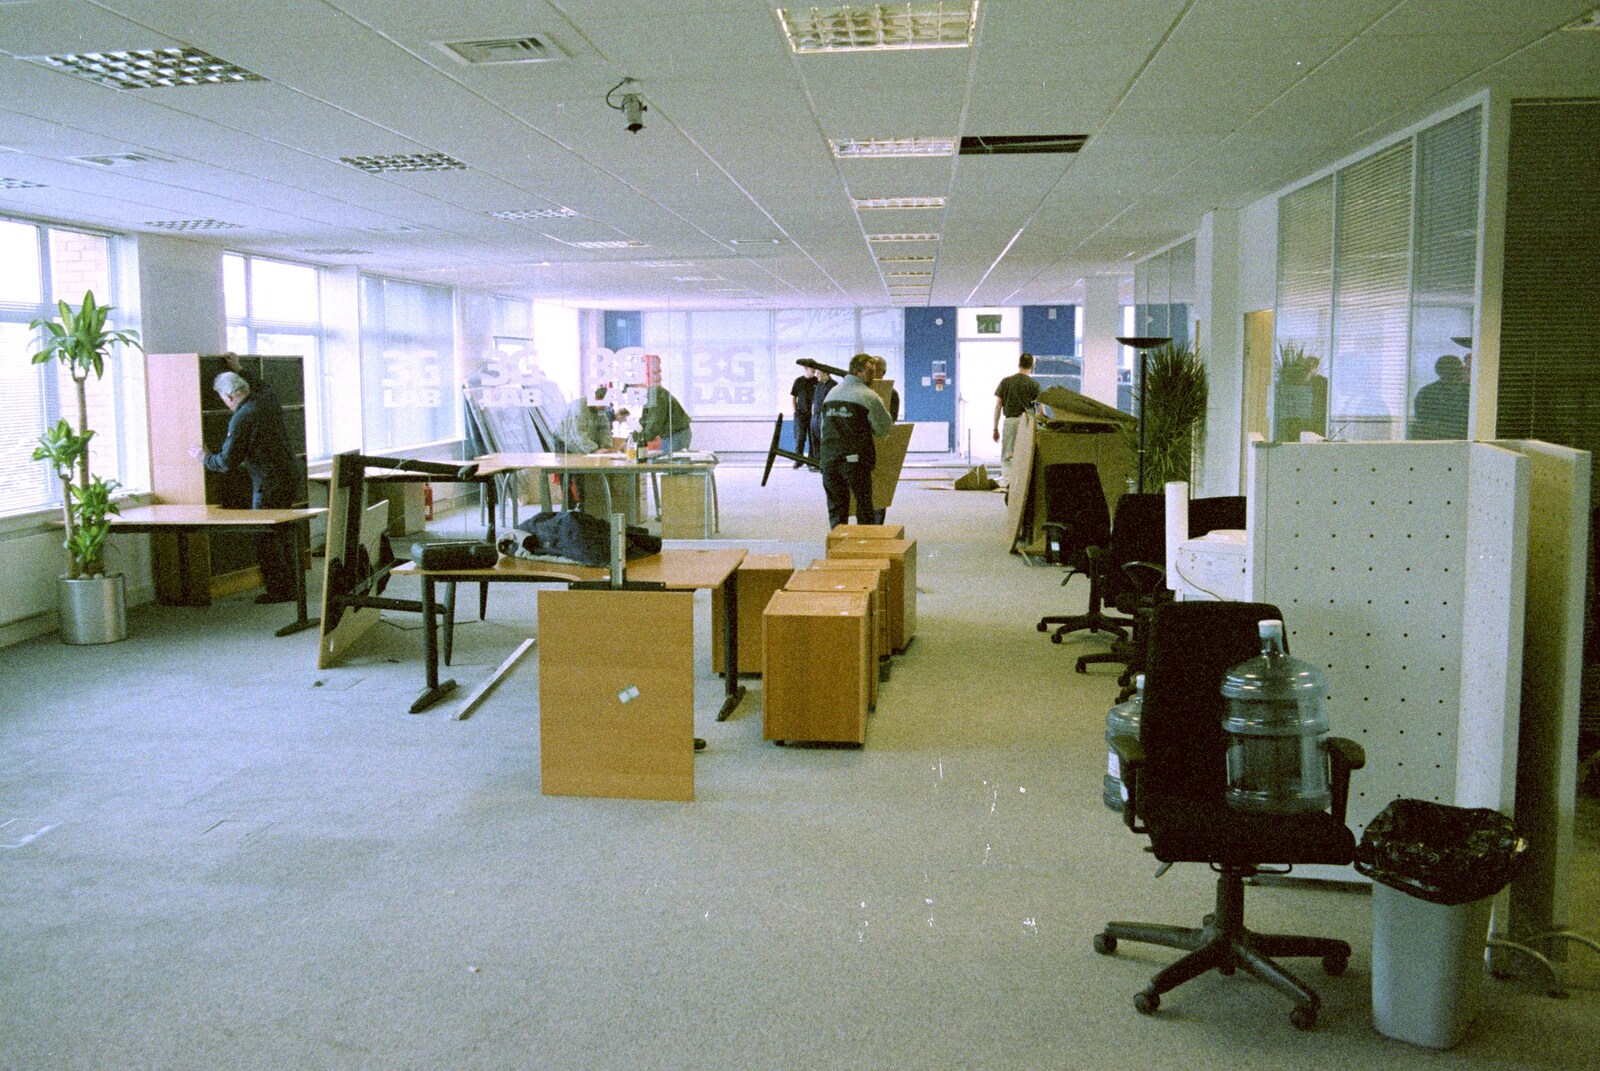 Furniture is moved in from 3G Lab Moves Offices, Milton Road, Cambourne and Cambridge - 27th August 2001